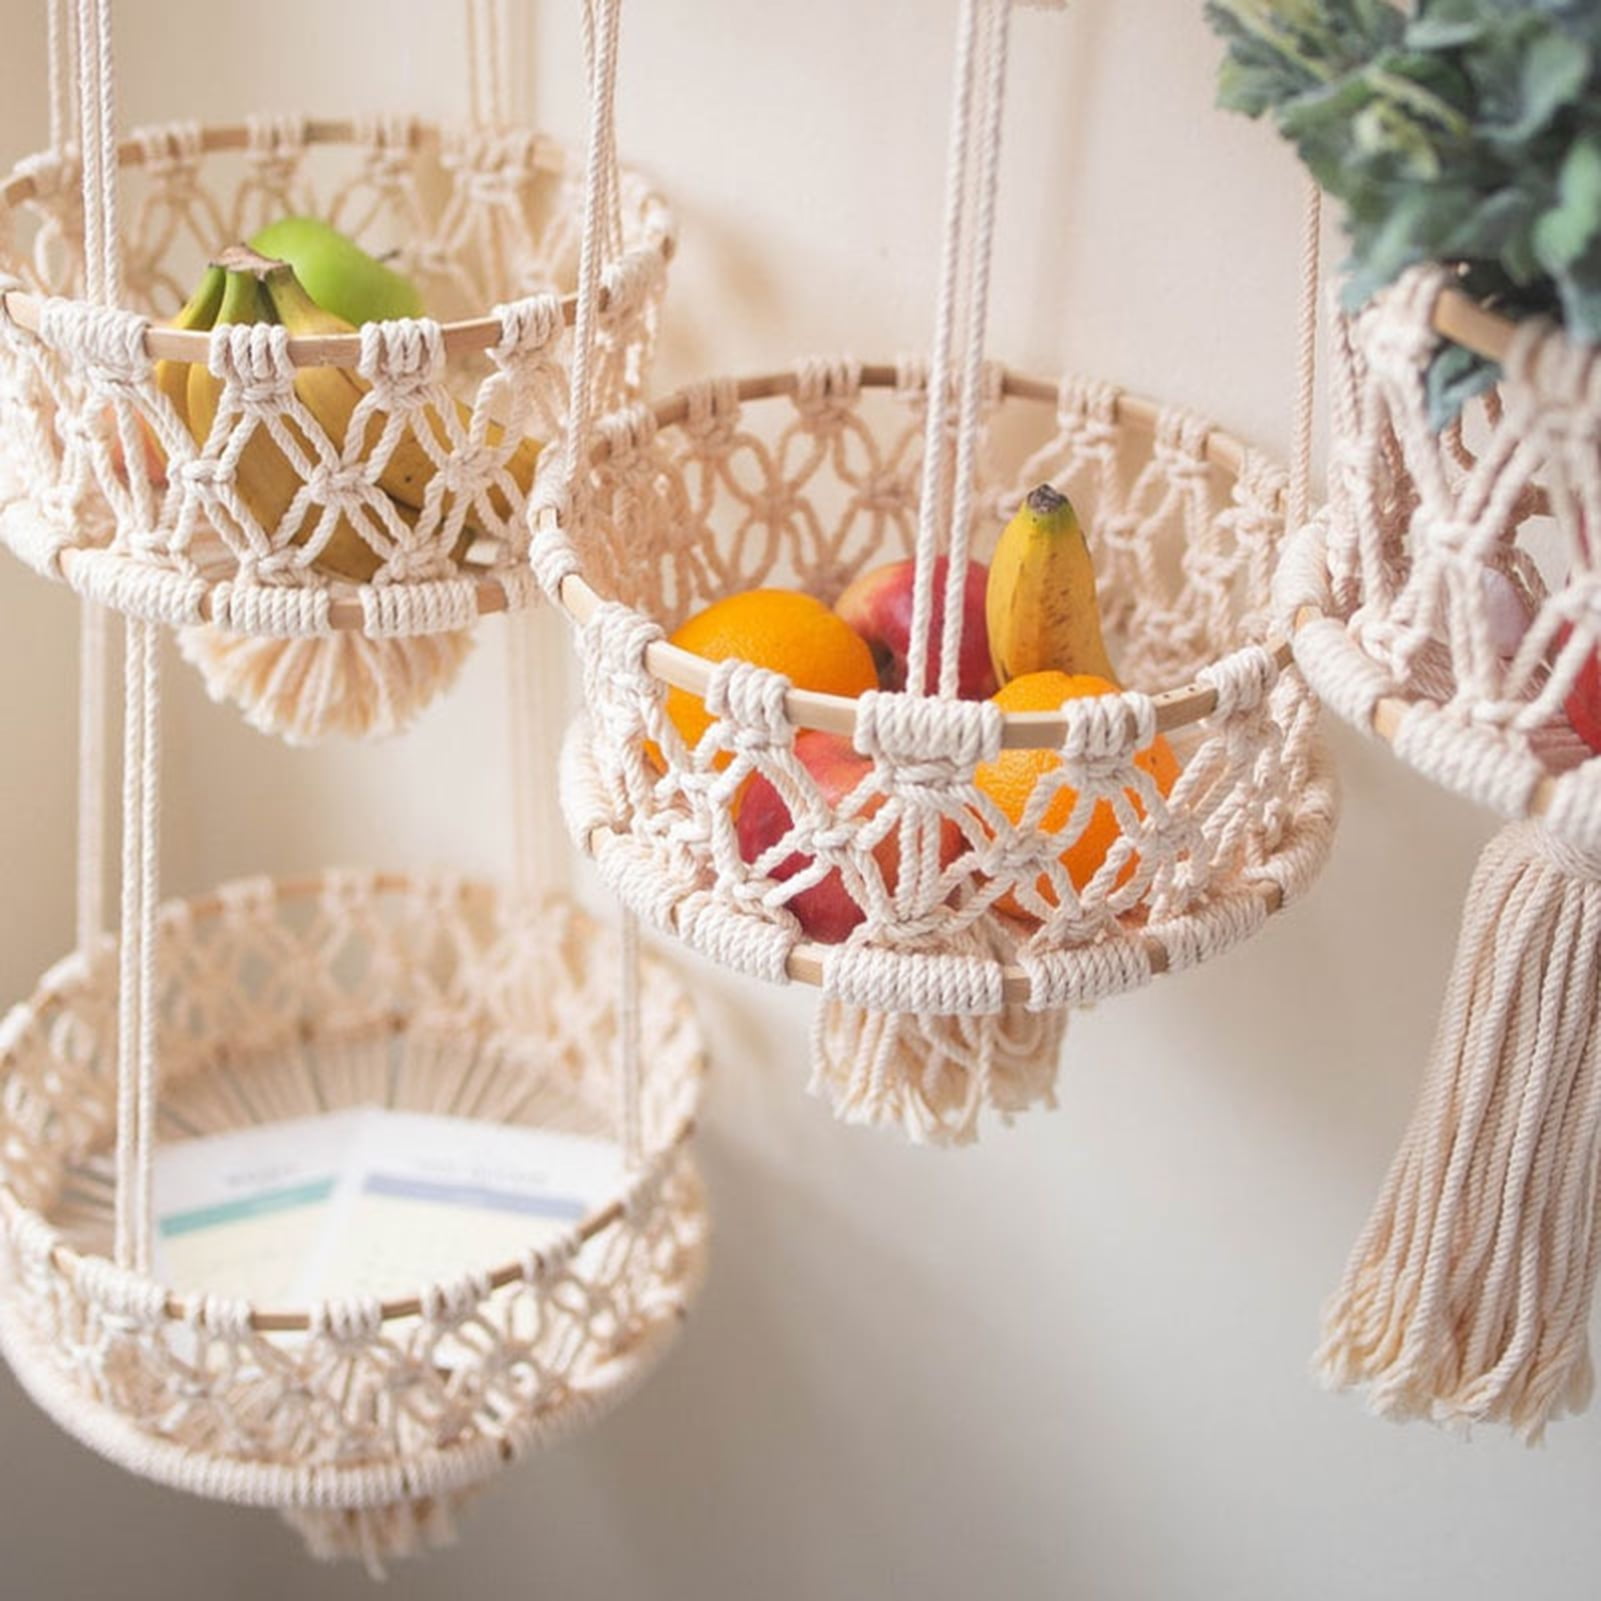 3 woven raffia decorative hanging pot holders with fruit